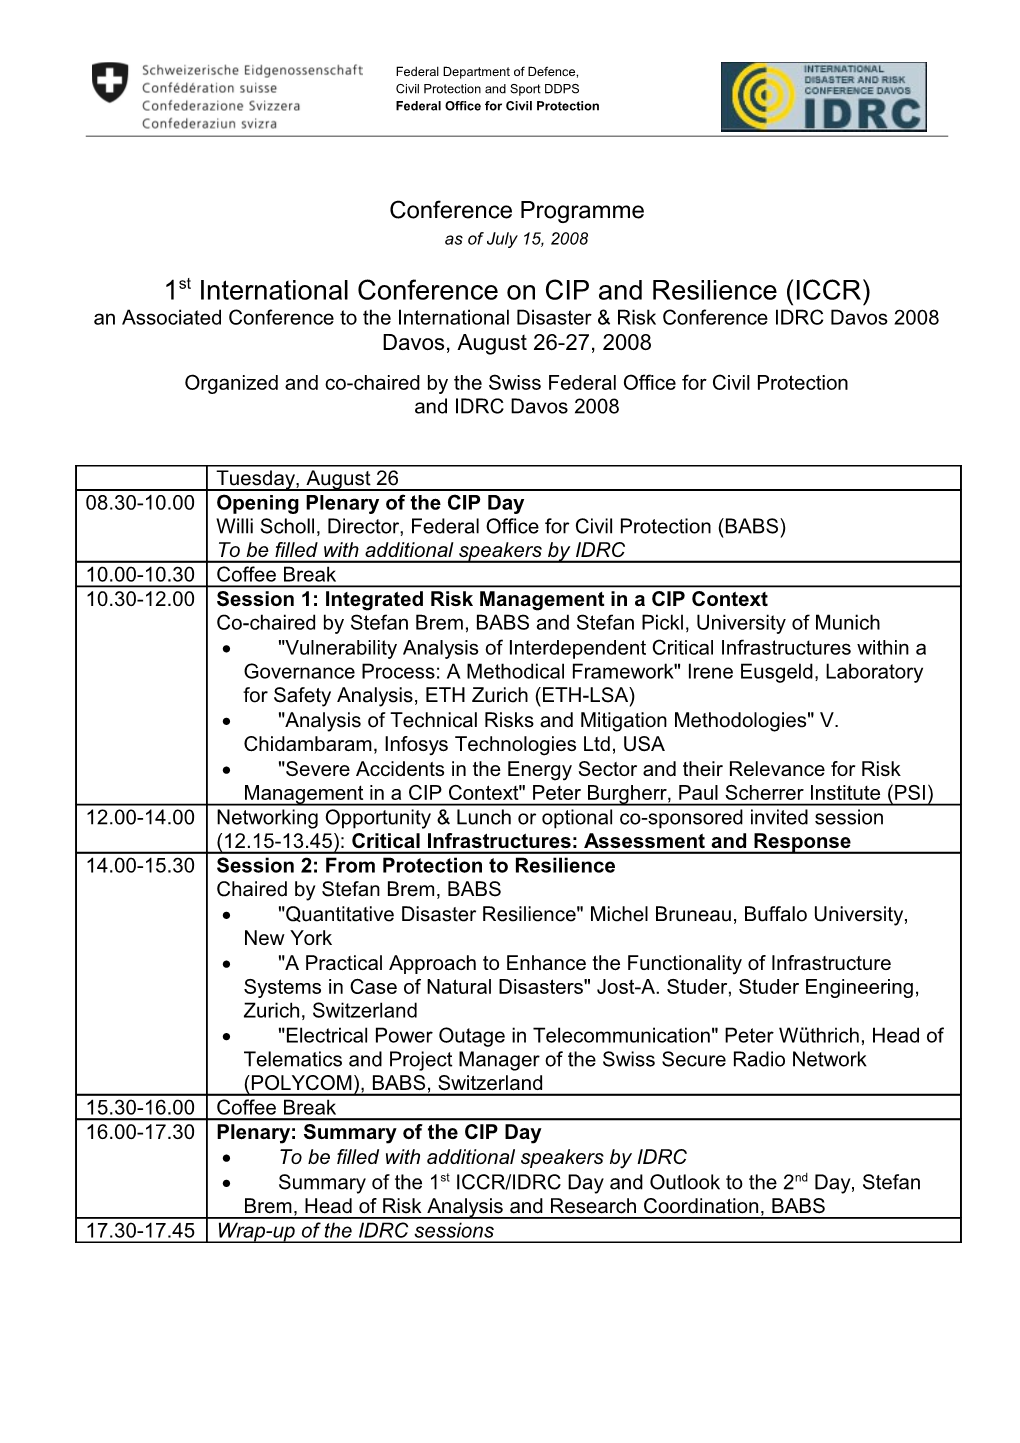 1St International Conference on CIP and Resilience (ICCR)